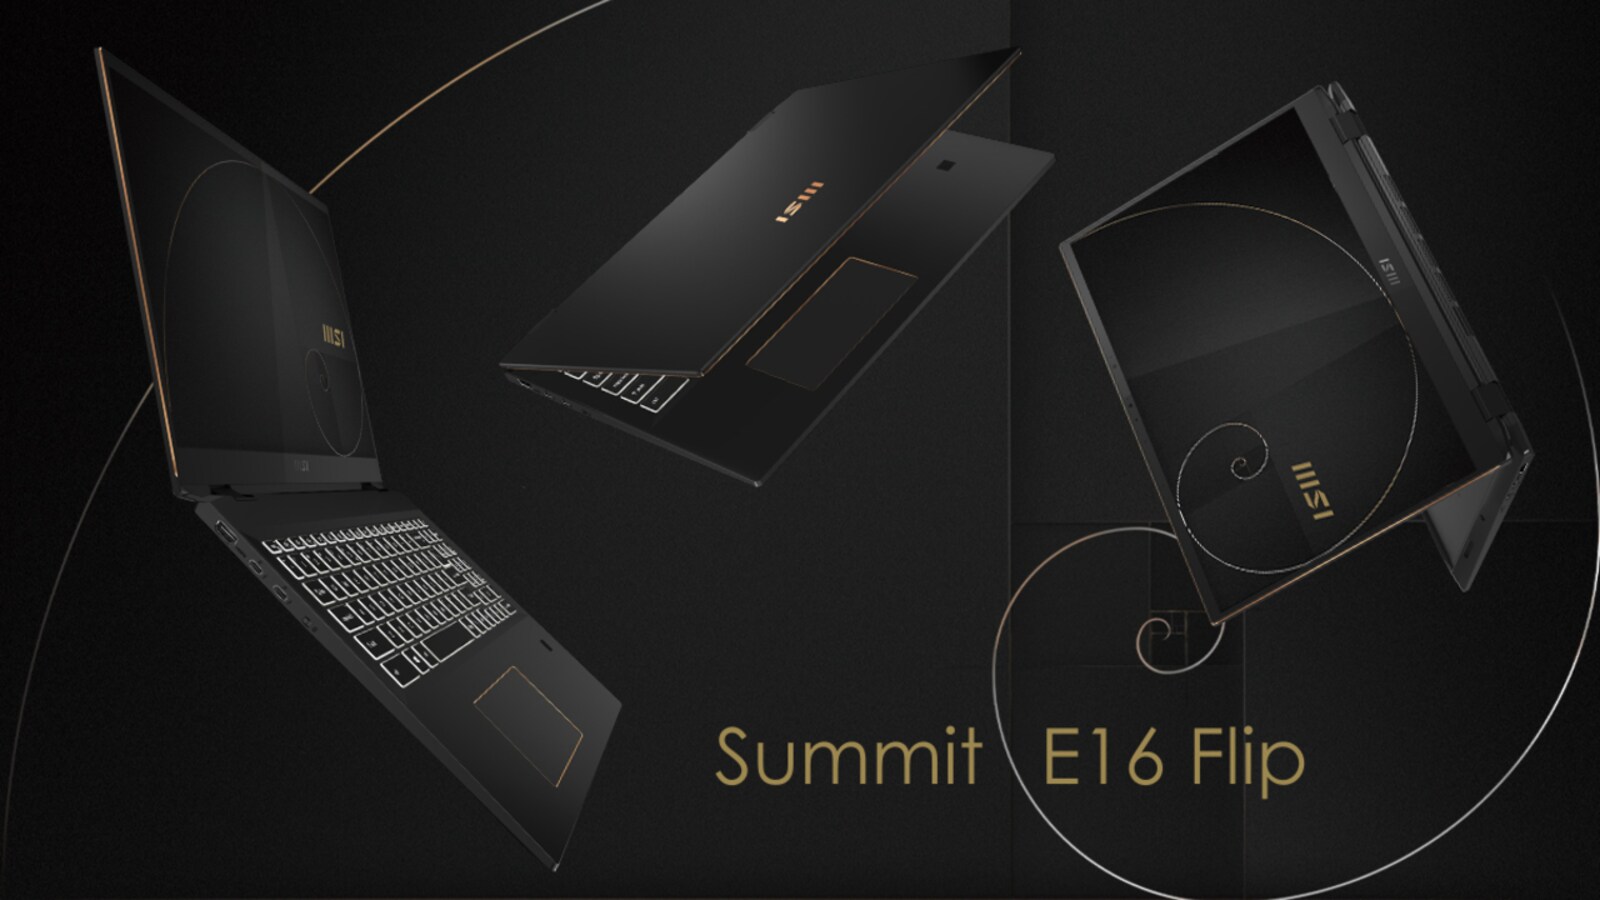 MSI Summit E13 Flip Evo, Summit E16 Flip with 11th Gen Intel processors  announced: Everything you need to know